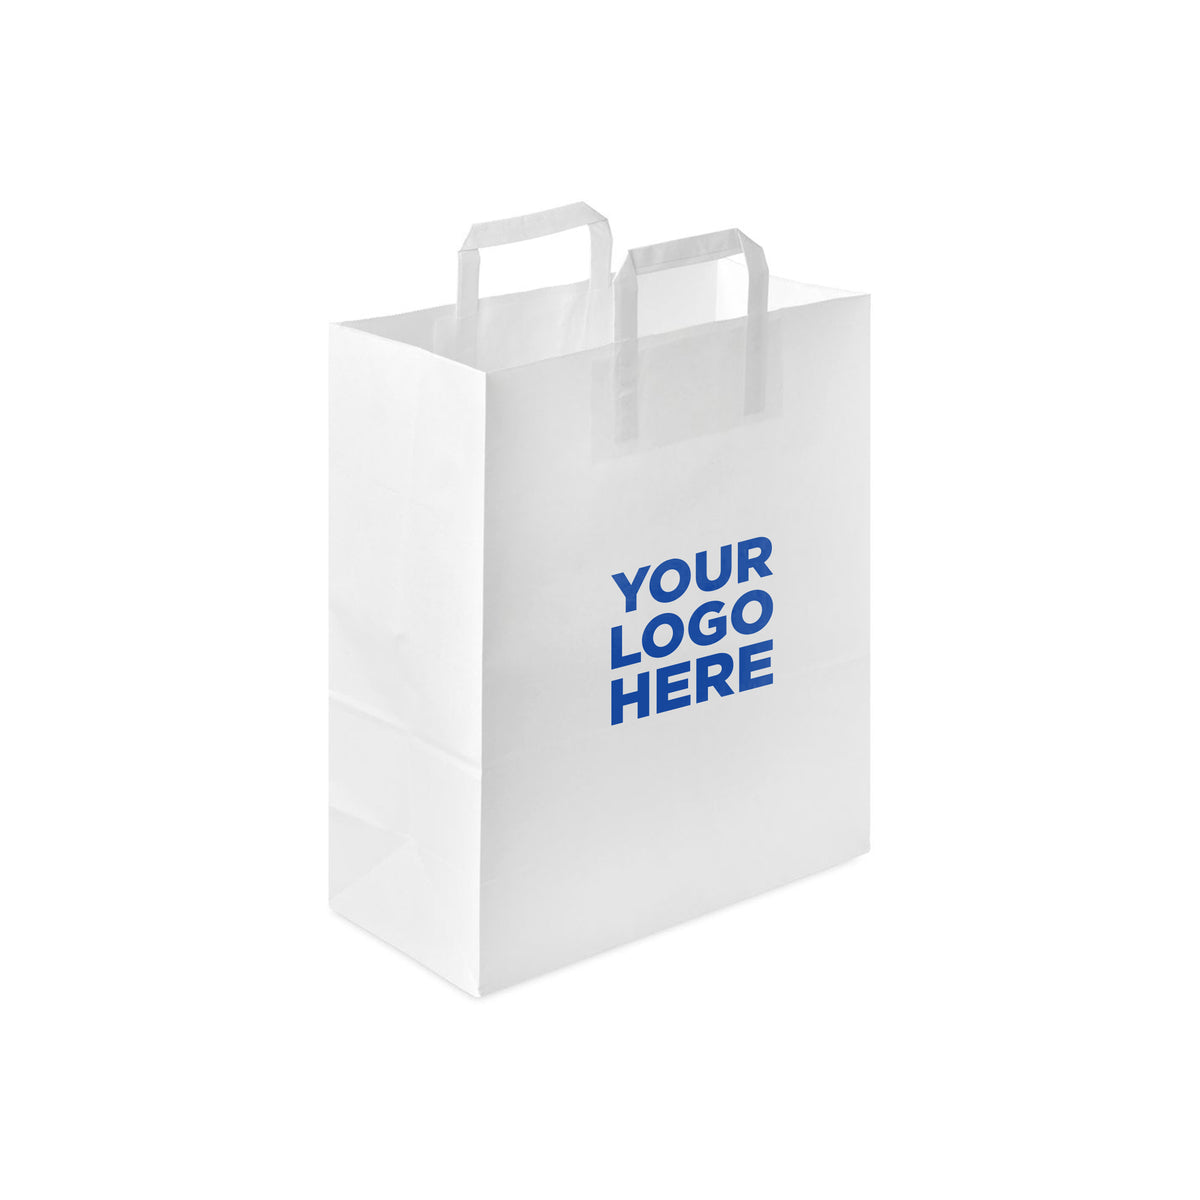 Custom White Gift Bags with Handles L11 x H13.2 x D4 inch -  Better-Package.com